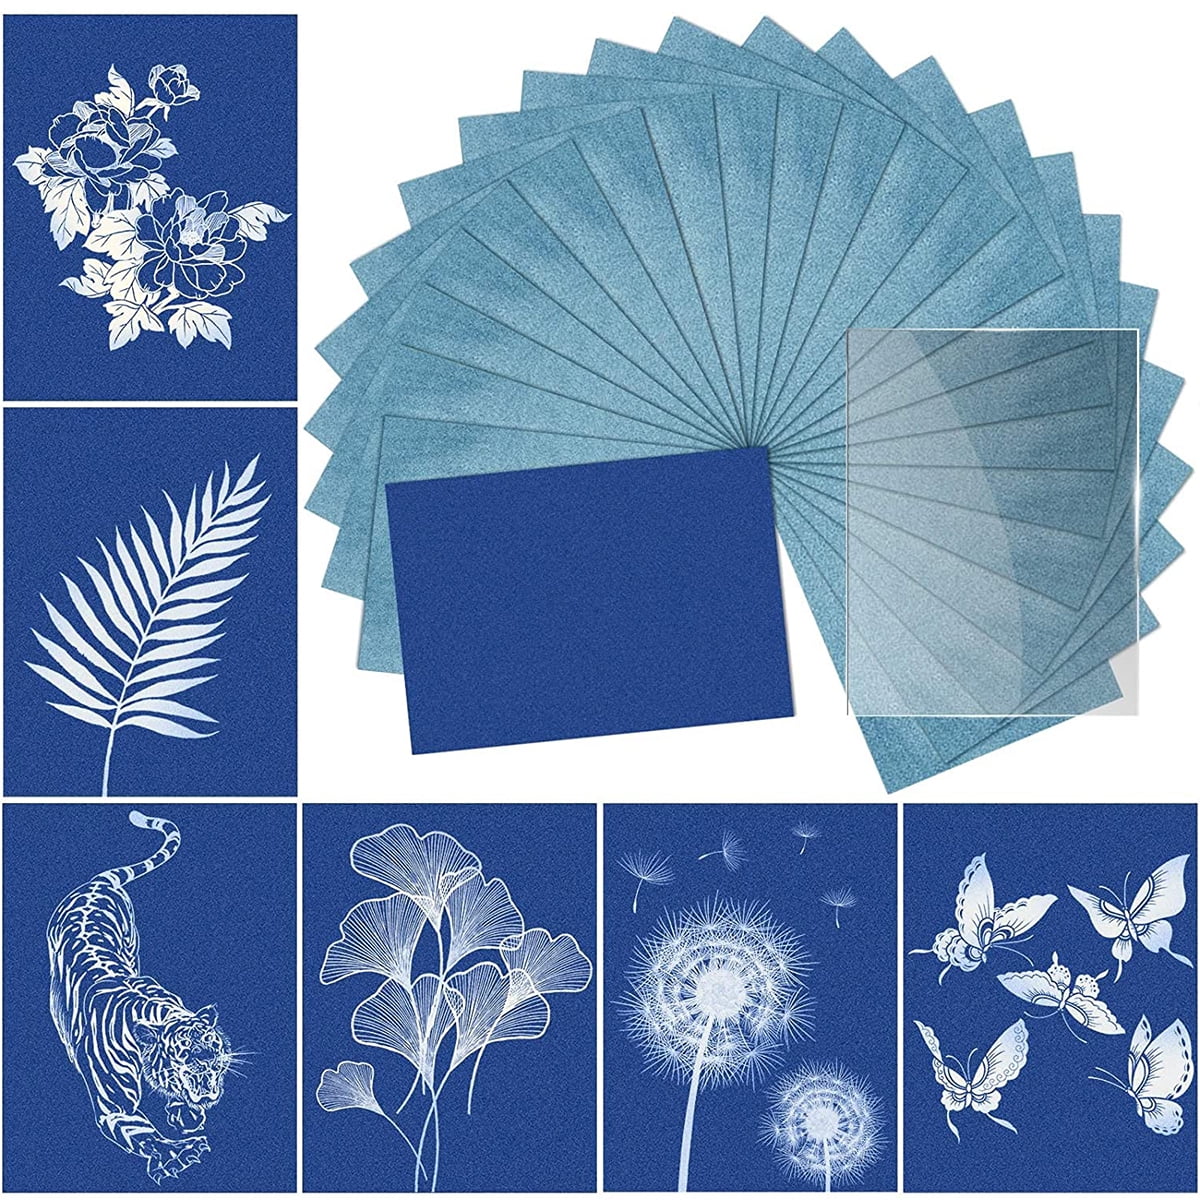 Cyanotype Paper - 32 Sheets Cyanotype Papers With 1 Sheet Acrylic Panel -  High Sensitivity Nature Printing Paper Cyanotype Paper For Diy Arts Crafts  P